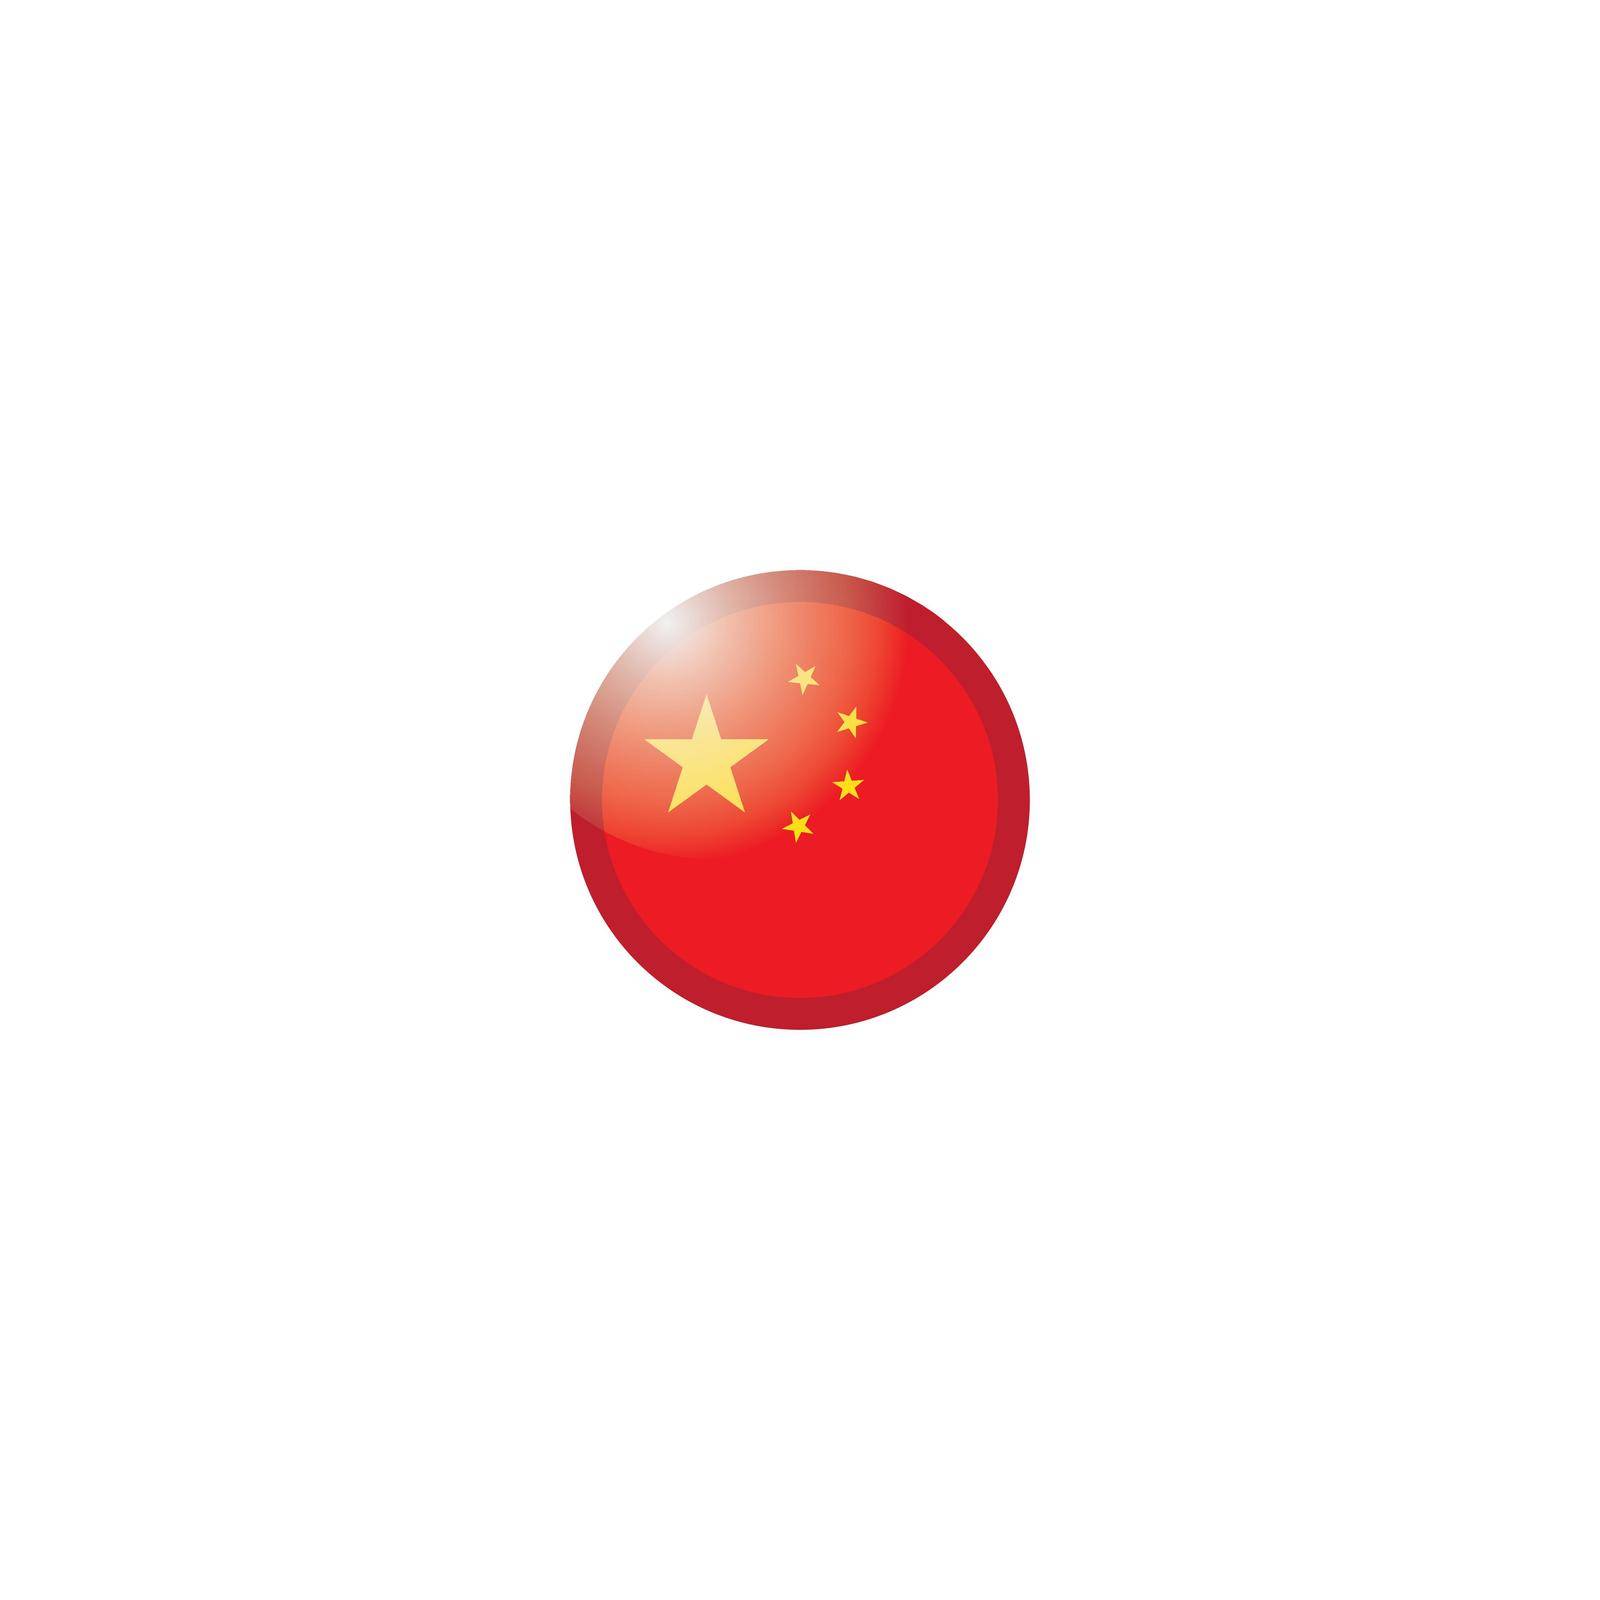 China flag vector illustration by awk